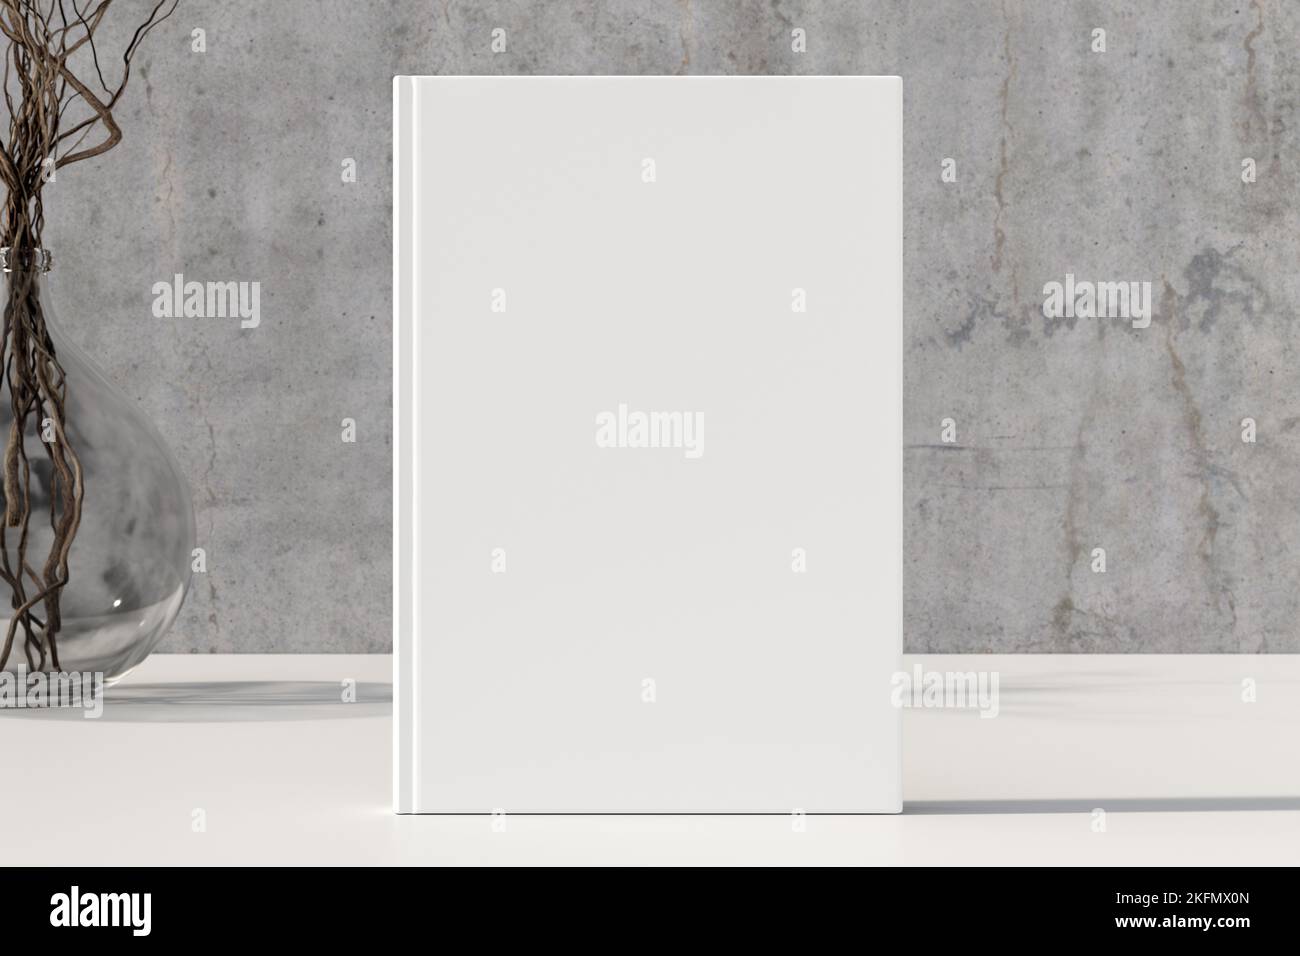 Vertical book cover mock up standing on a white desk with concrete wall background Stock Photo